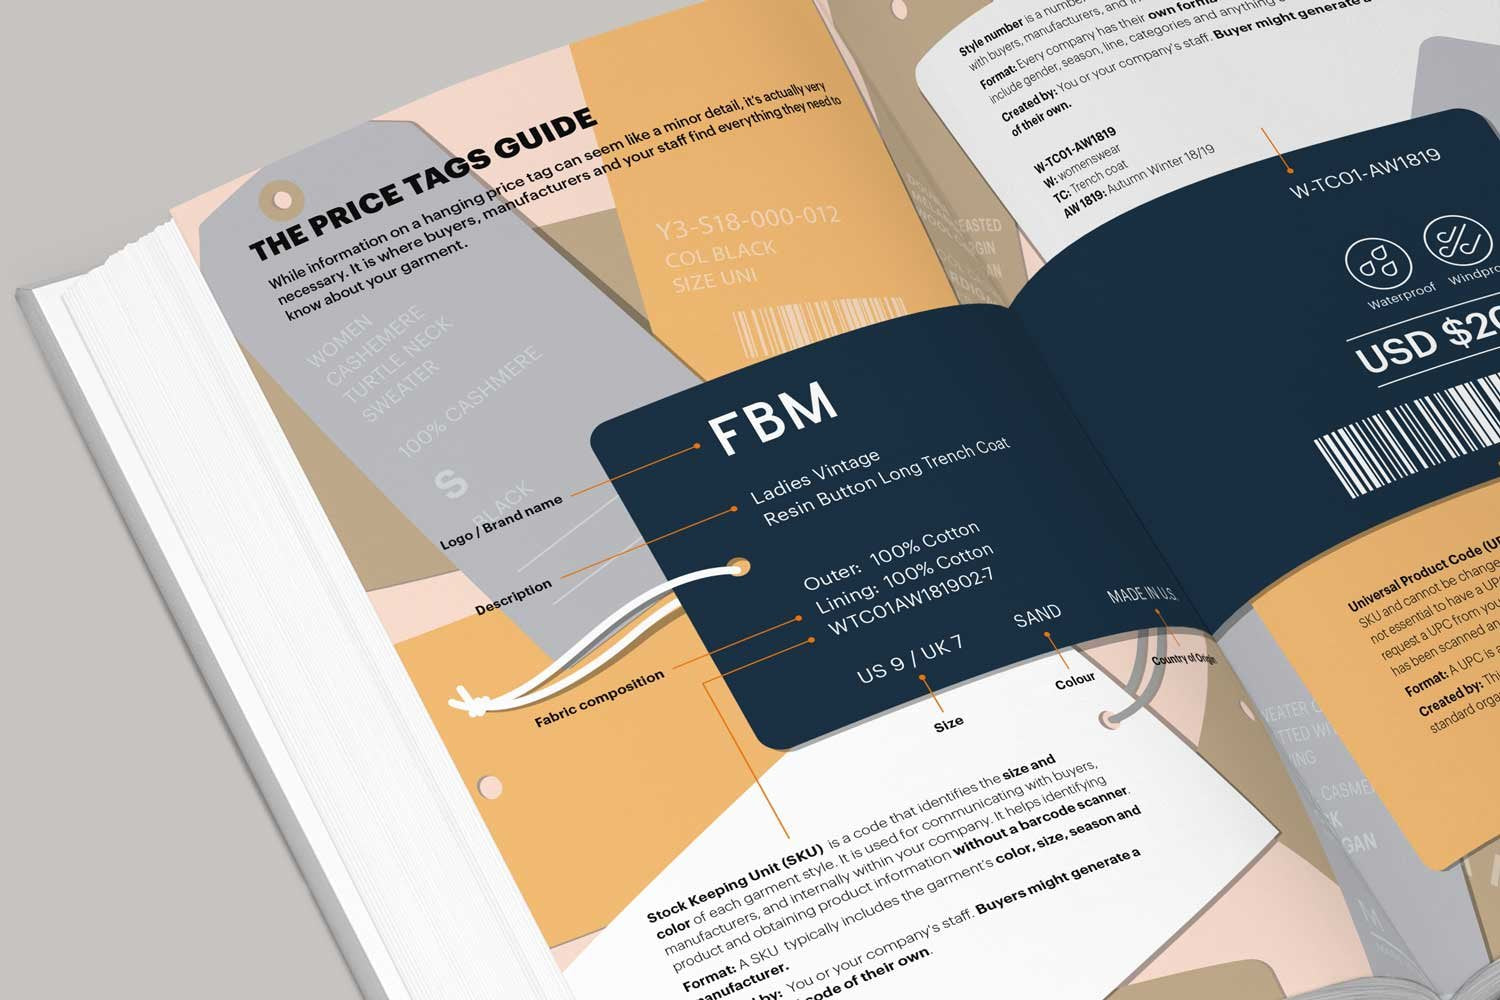 The Fashion Business Manual: an Illustrated Guide to Building a Fashion Brand